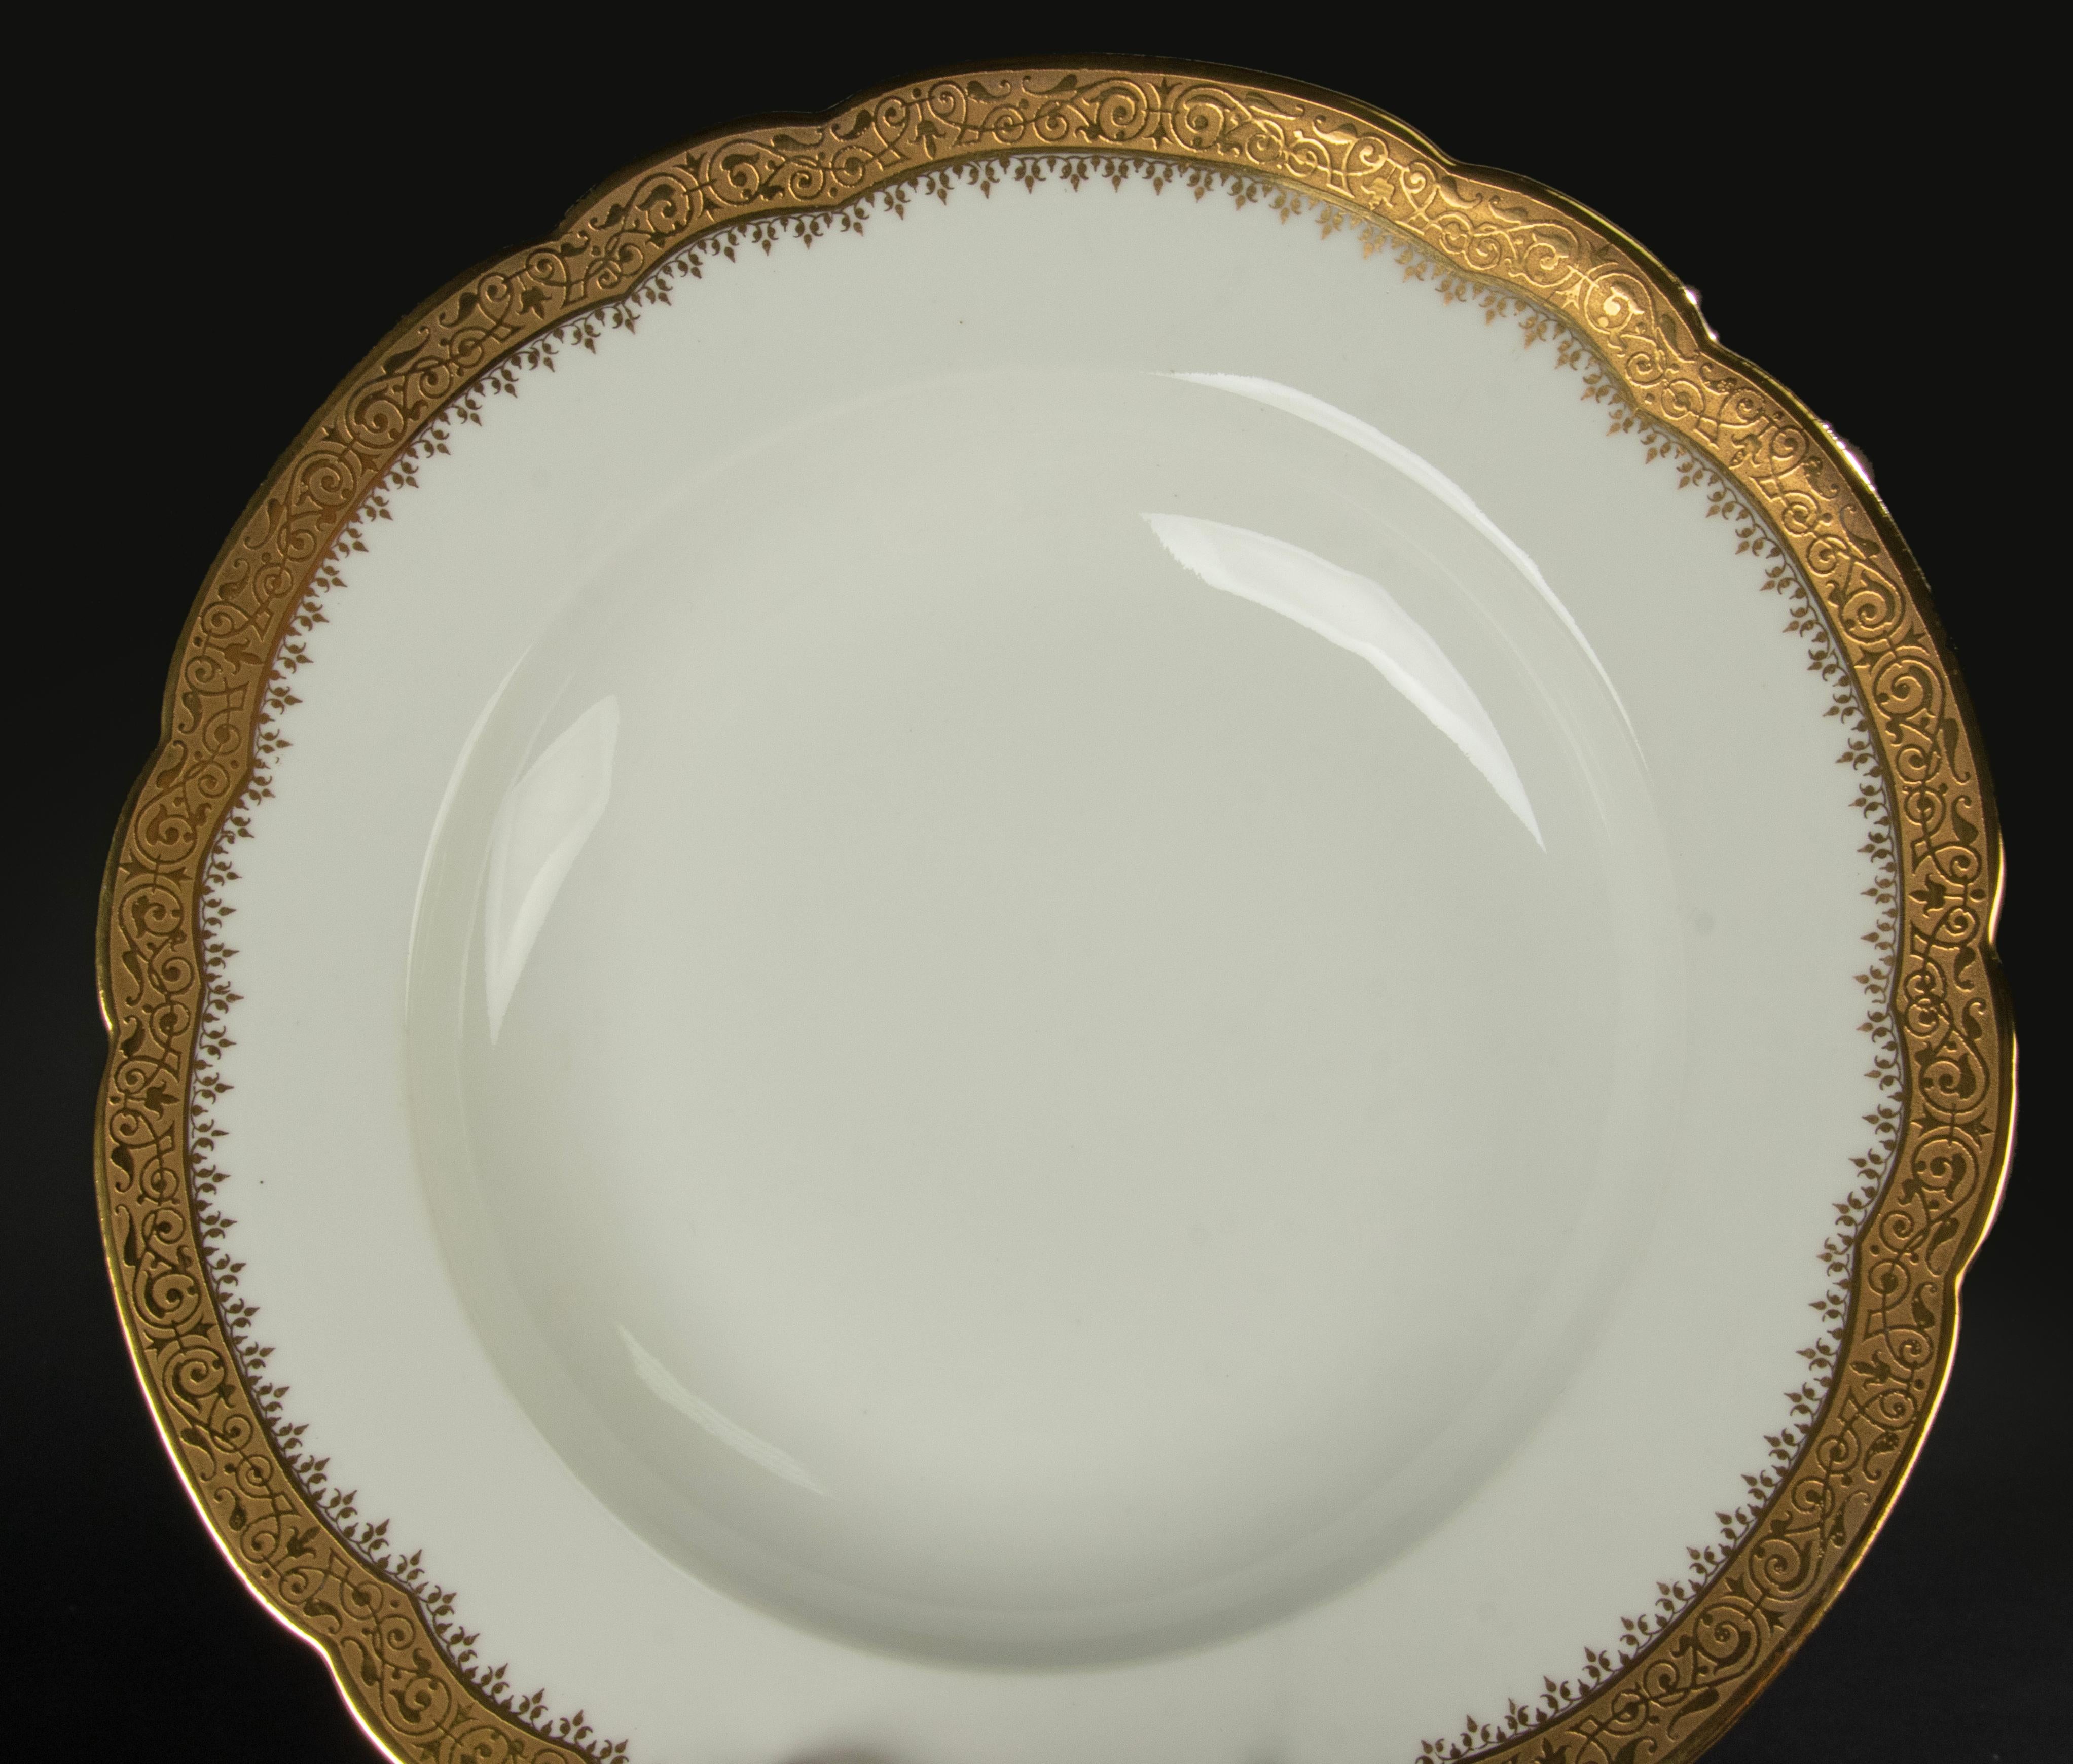 Hand-Crafted 51-Piece Set Porcelain Tableware for 12 Persons - Limoges Incrusted Gold Trims